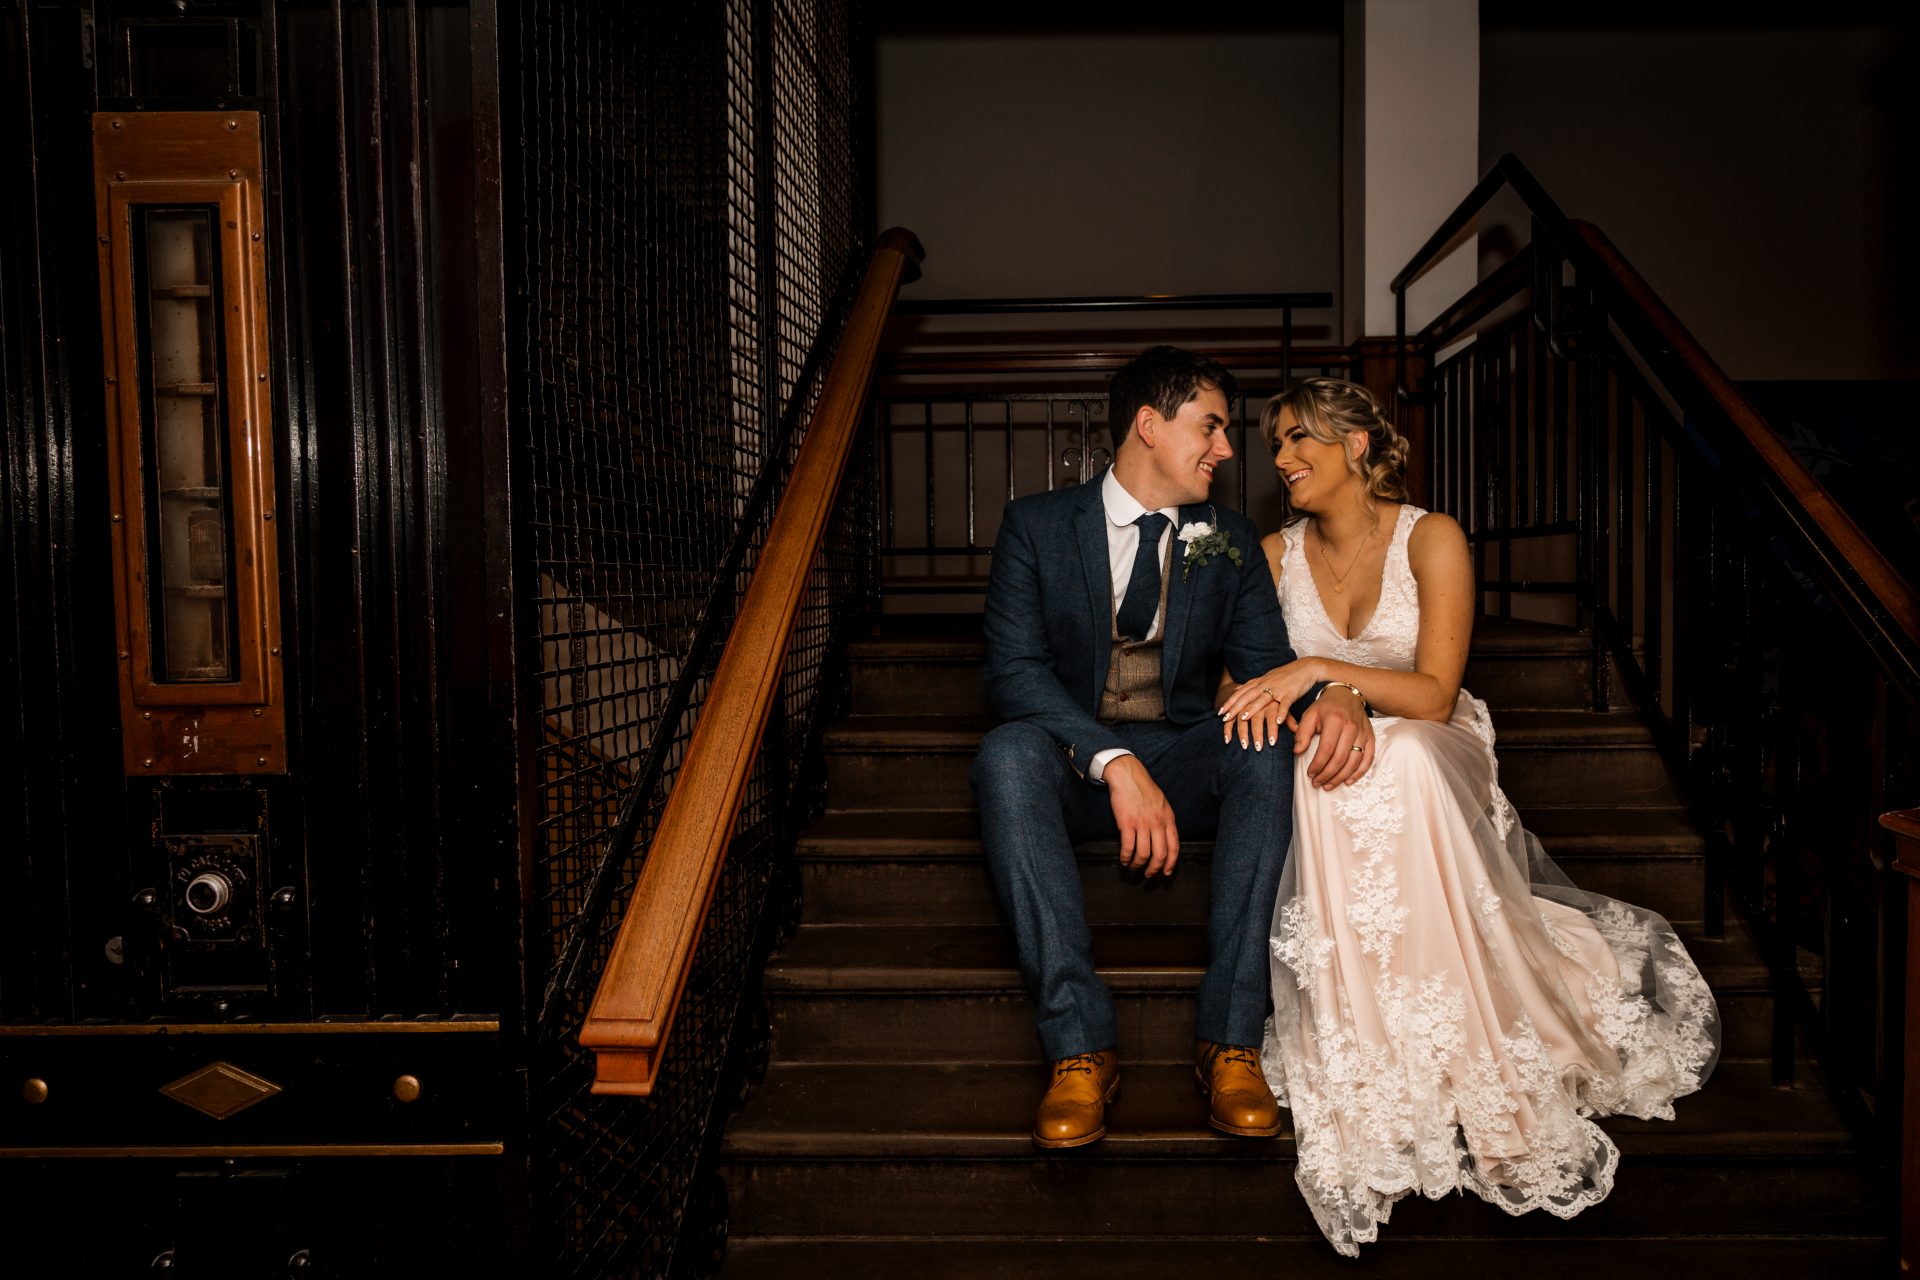 Isabelle Biggs Photography - Anne & Daniel on the stairs in The Tetley